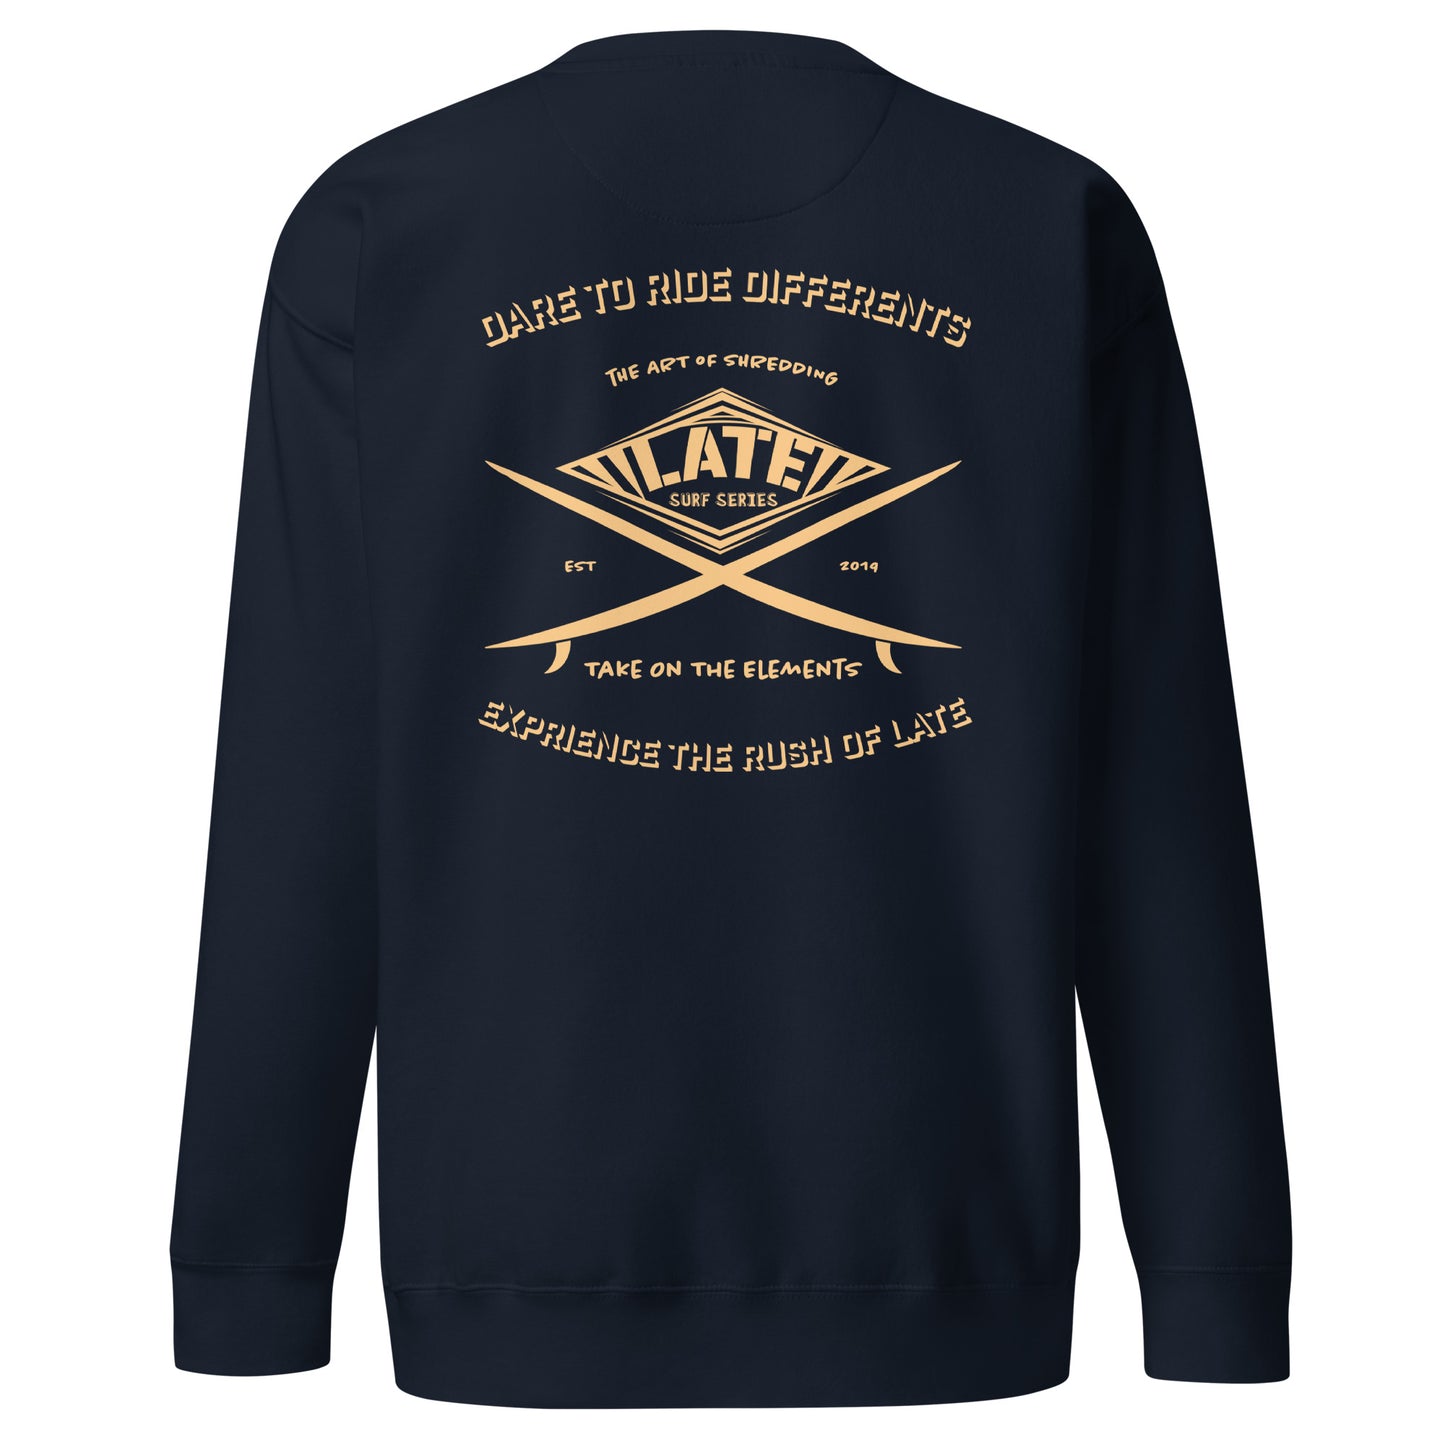 Sweatshirt surfboard dare to ride differents Take On The Elements experience the rush with Late de dos unisex couleur navy